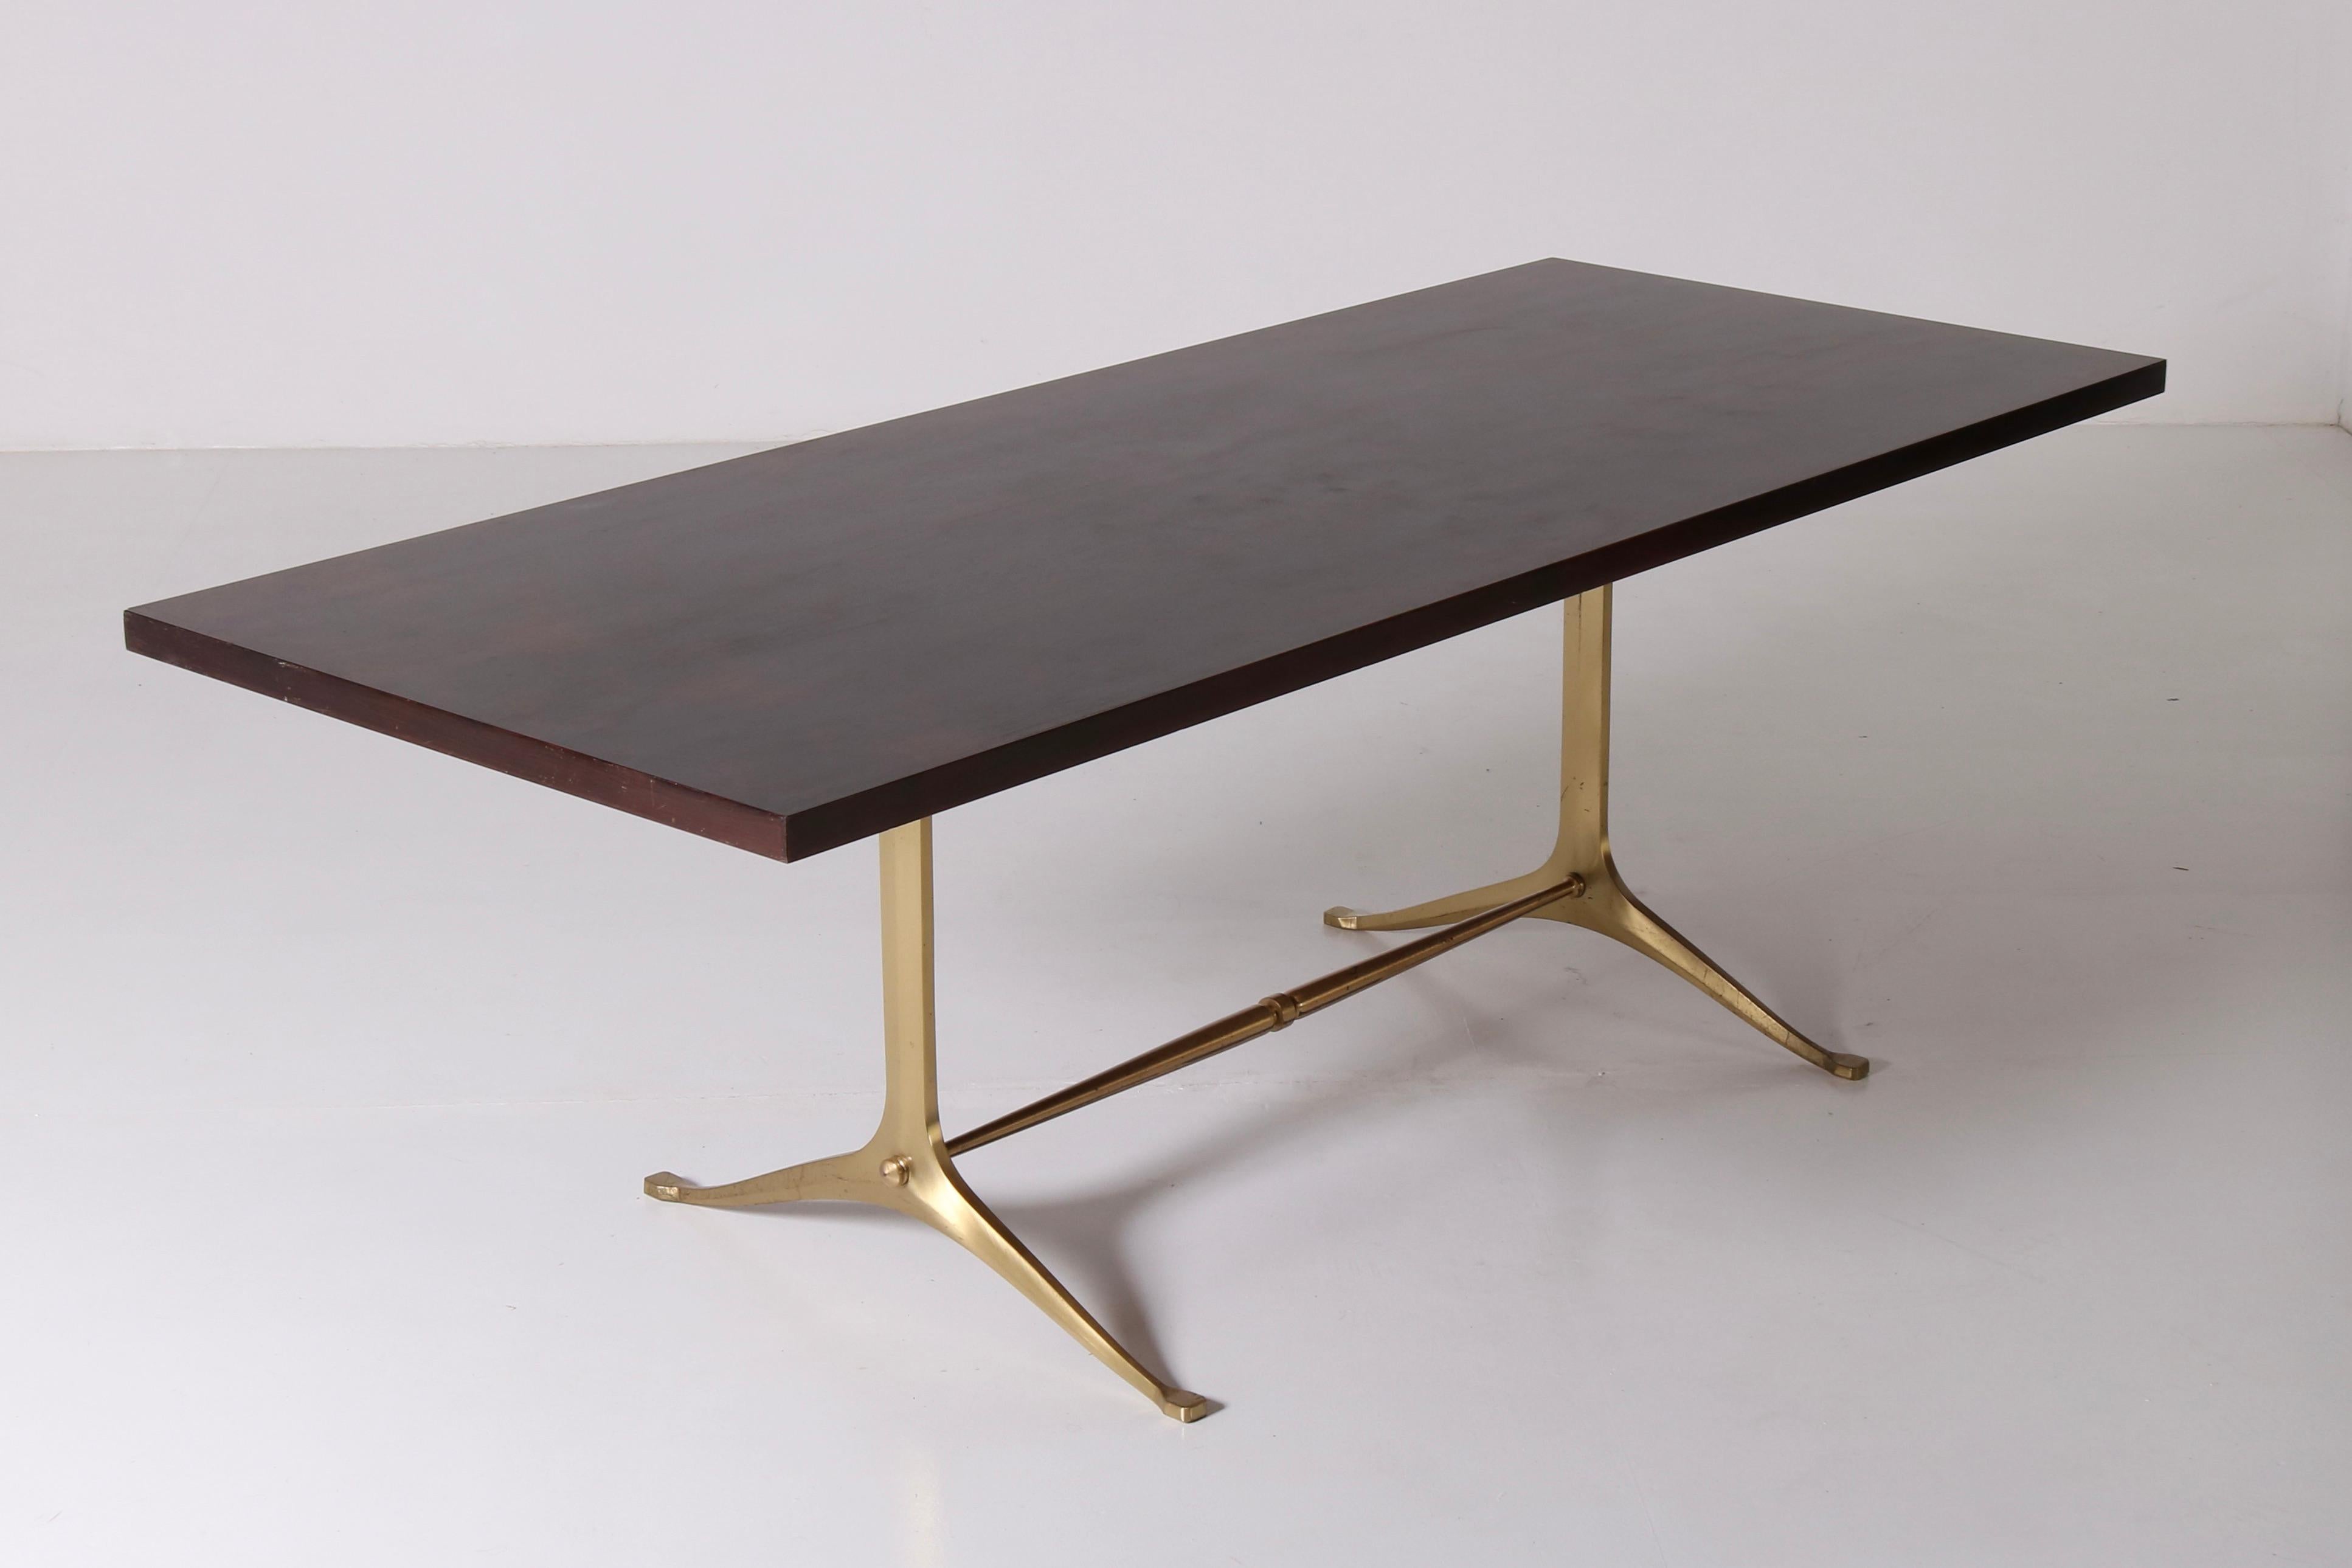 This Melchiorre Bega table from 1960s  perfectly embodies Italian design's timeless elegance and commitment to merge aesthetics and functional excellence. Characterized by meticulous craftsmanship, the table features a wood structure with brass